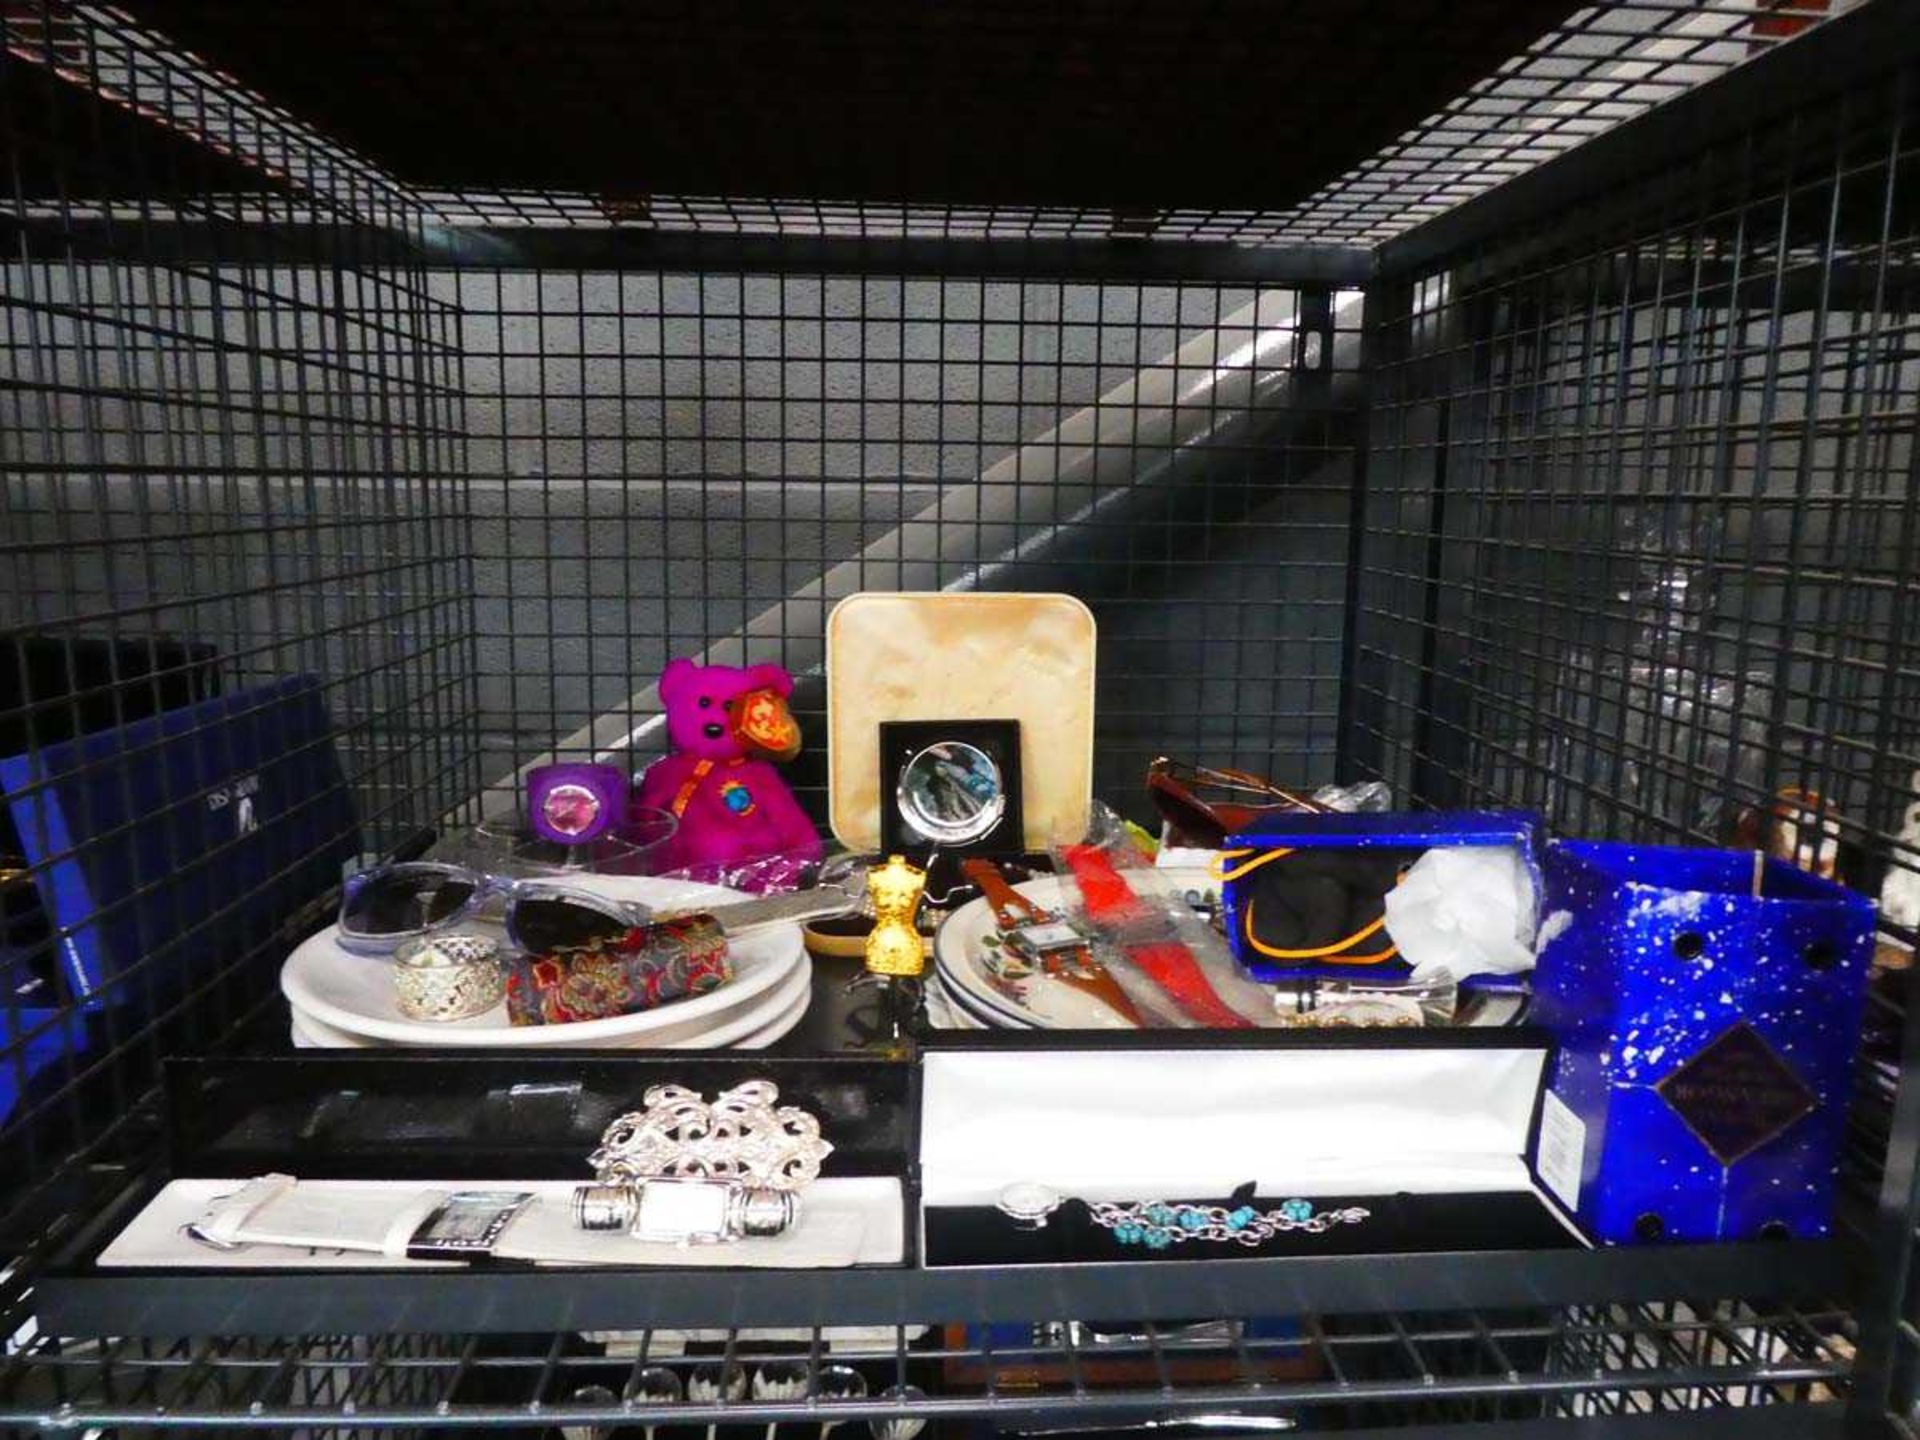 Cage containing TY teddy bear, wristwatches, costume jewellery, and crocker